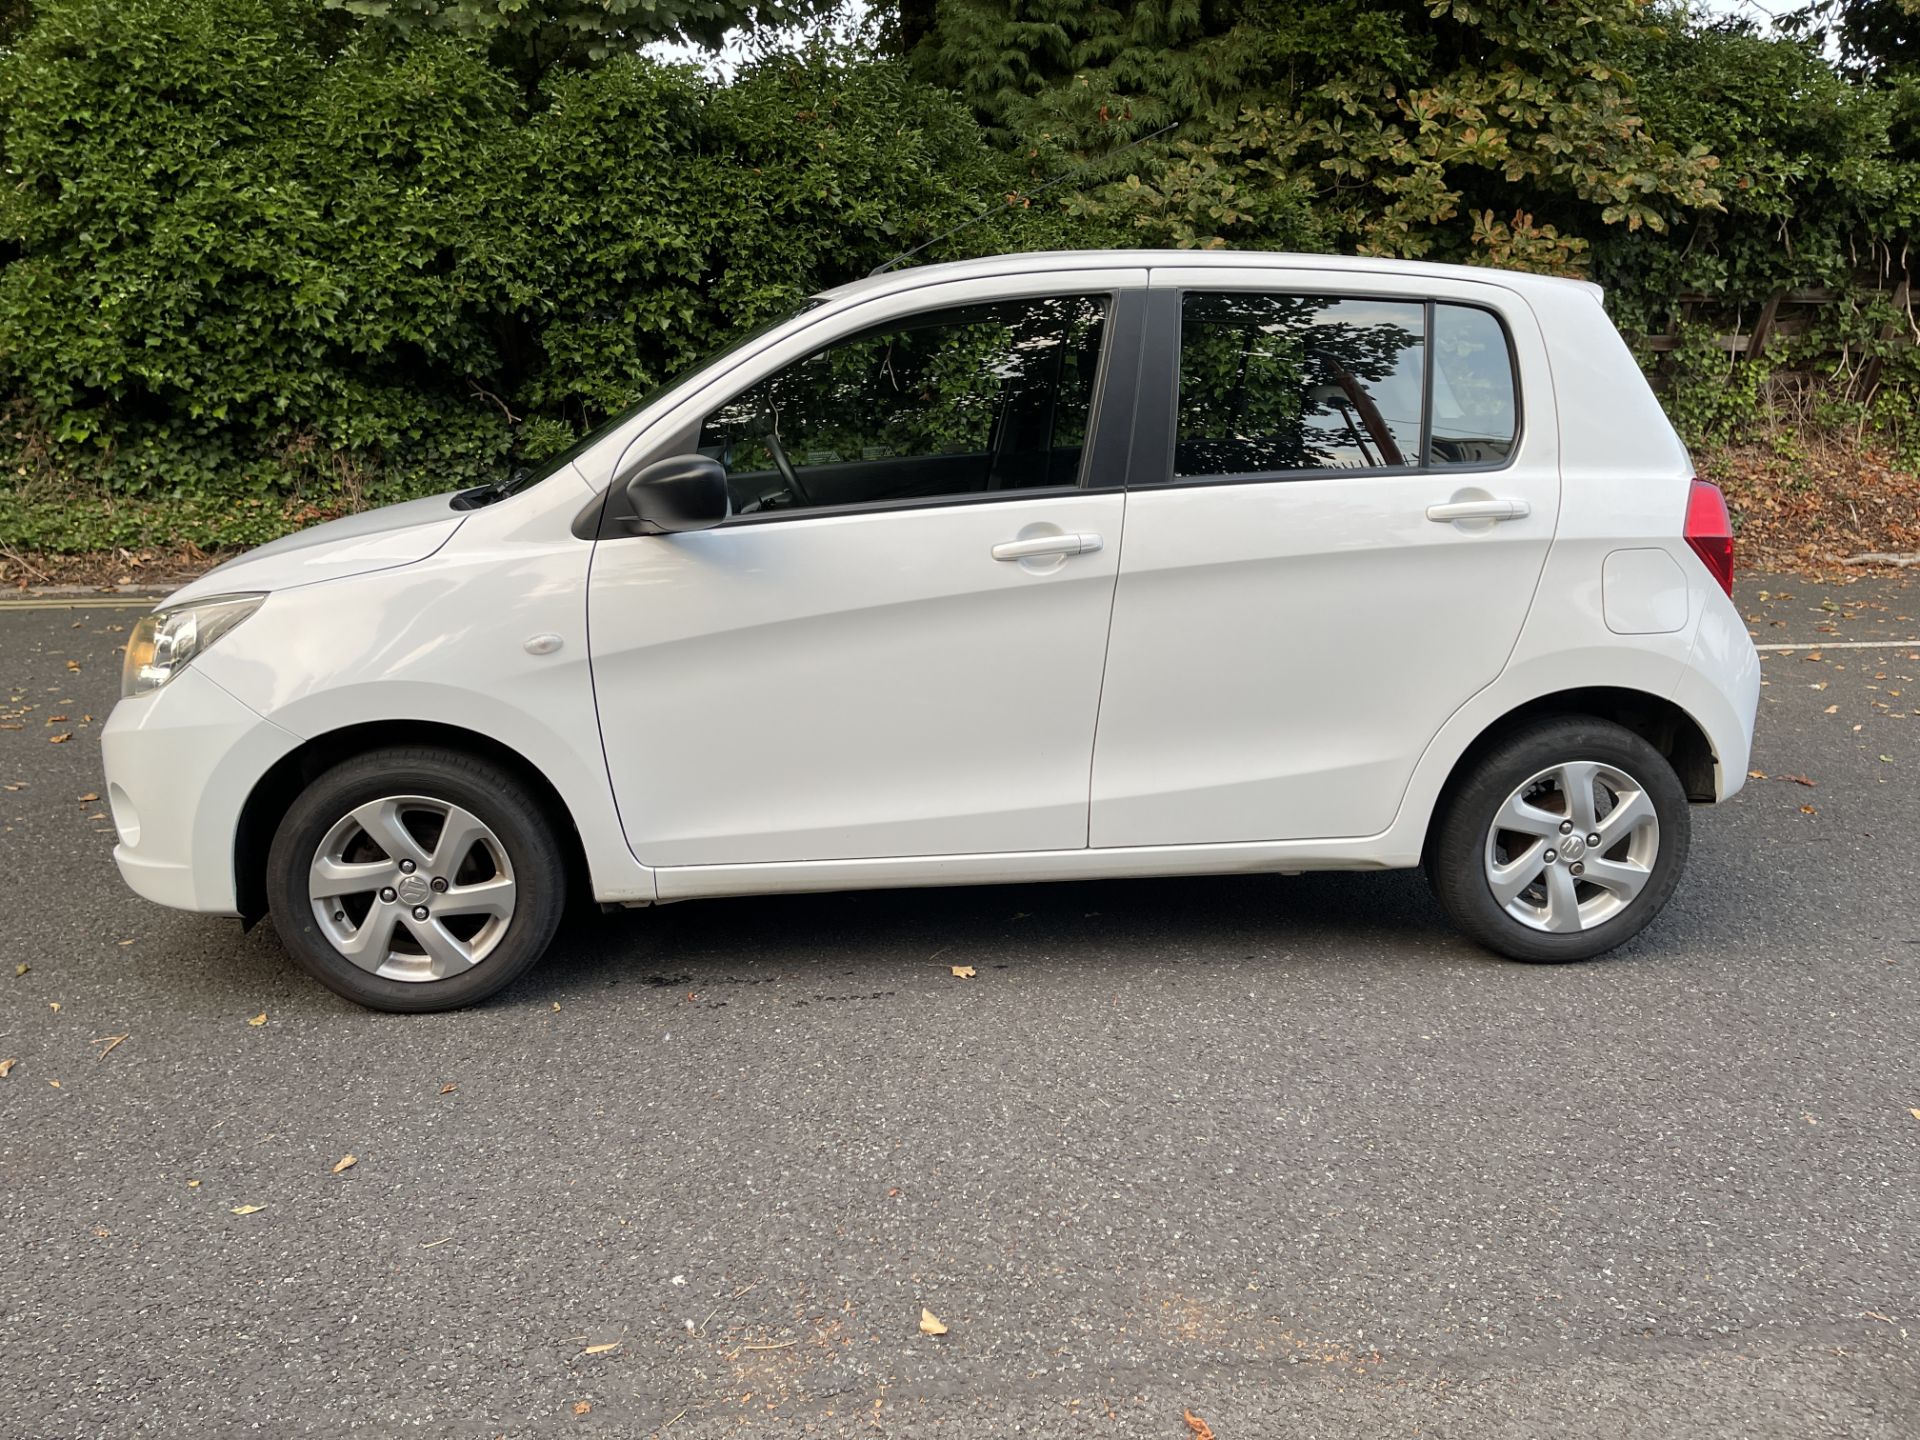 Suzuki Celerio SZ3 - Clean Air Zone Exempt - Pay No Charges - No VAT on Hammer Price - Image 4 of 22